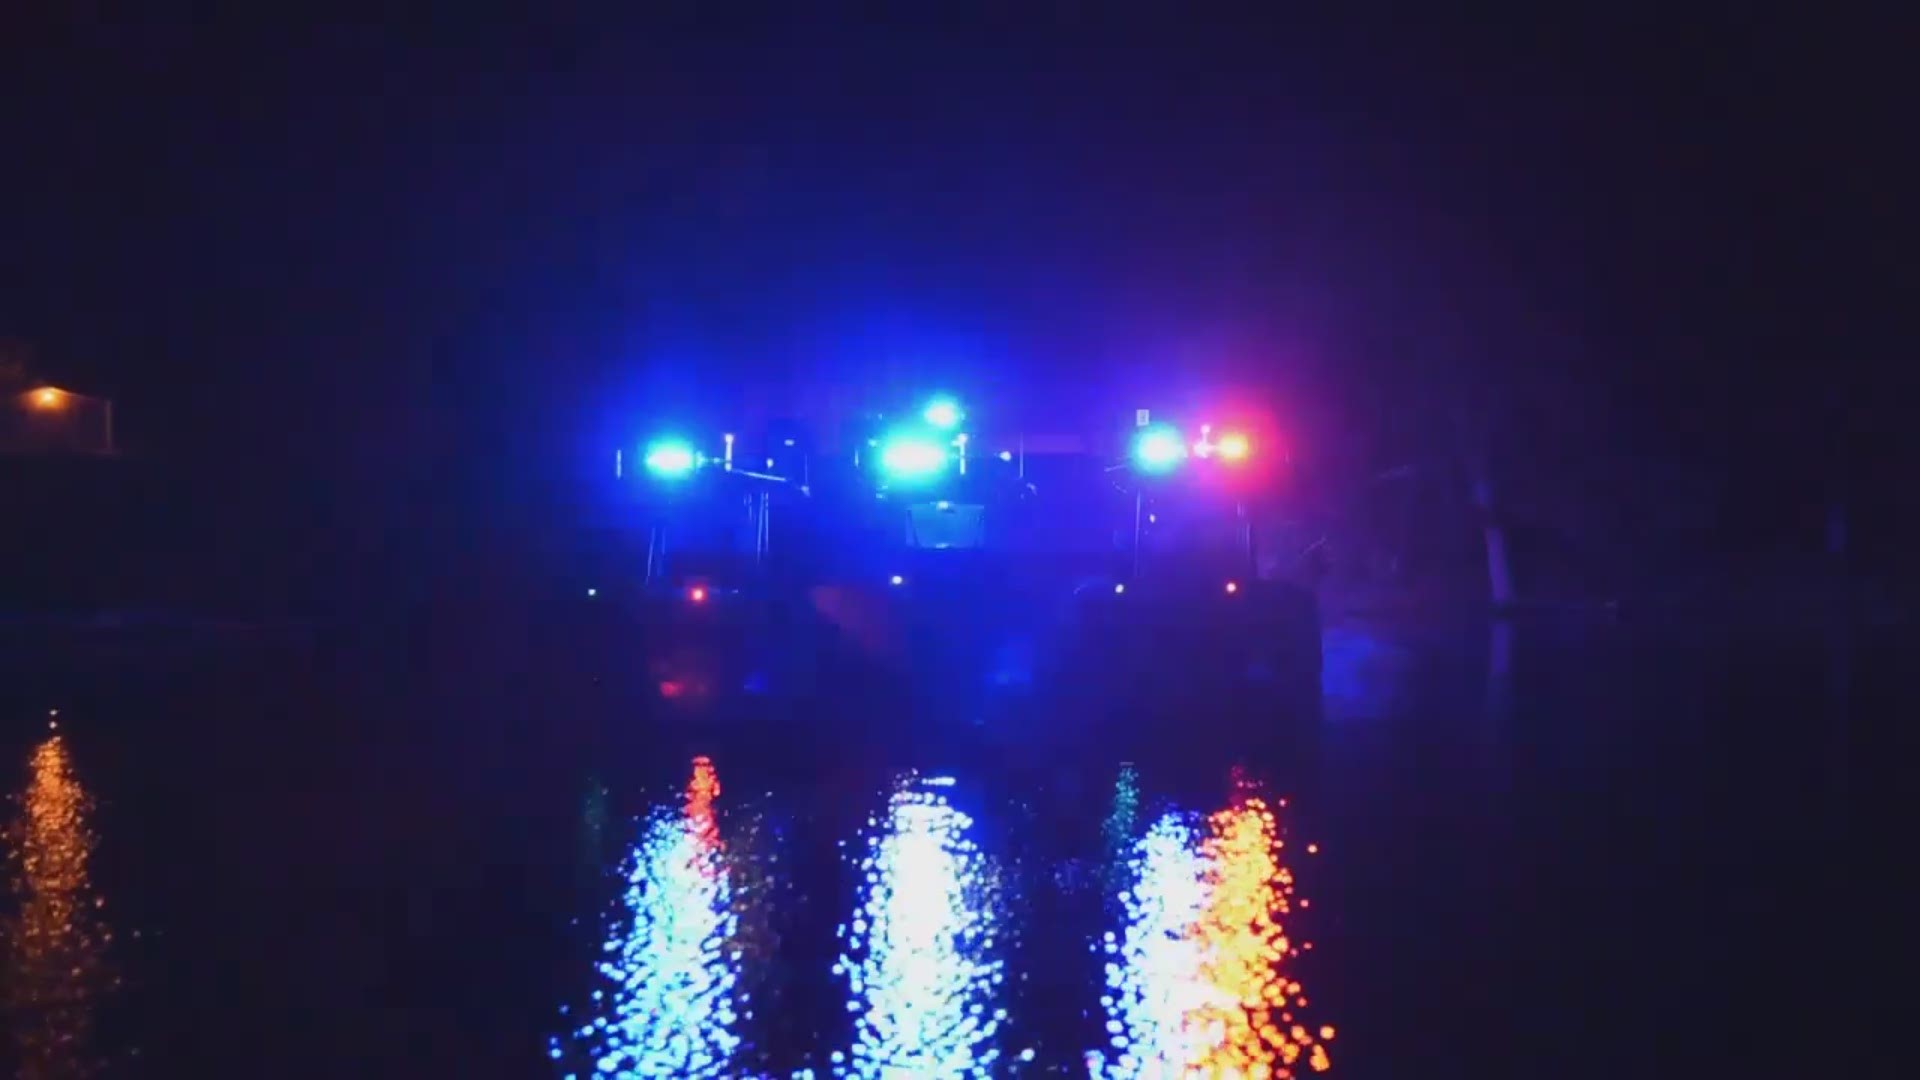 The lake, boats and national anthem… it’s not your typical light display, but the Missouri State Highway Patrol is hoping the unique message will get people’s attention this Fourth of July. Video courtesy: Missouri State Highway Patrol